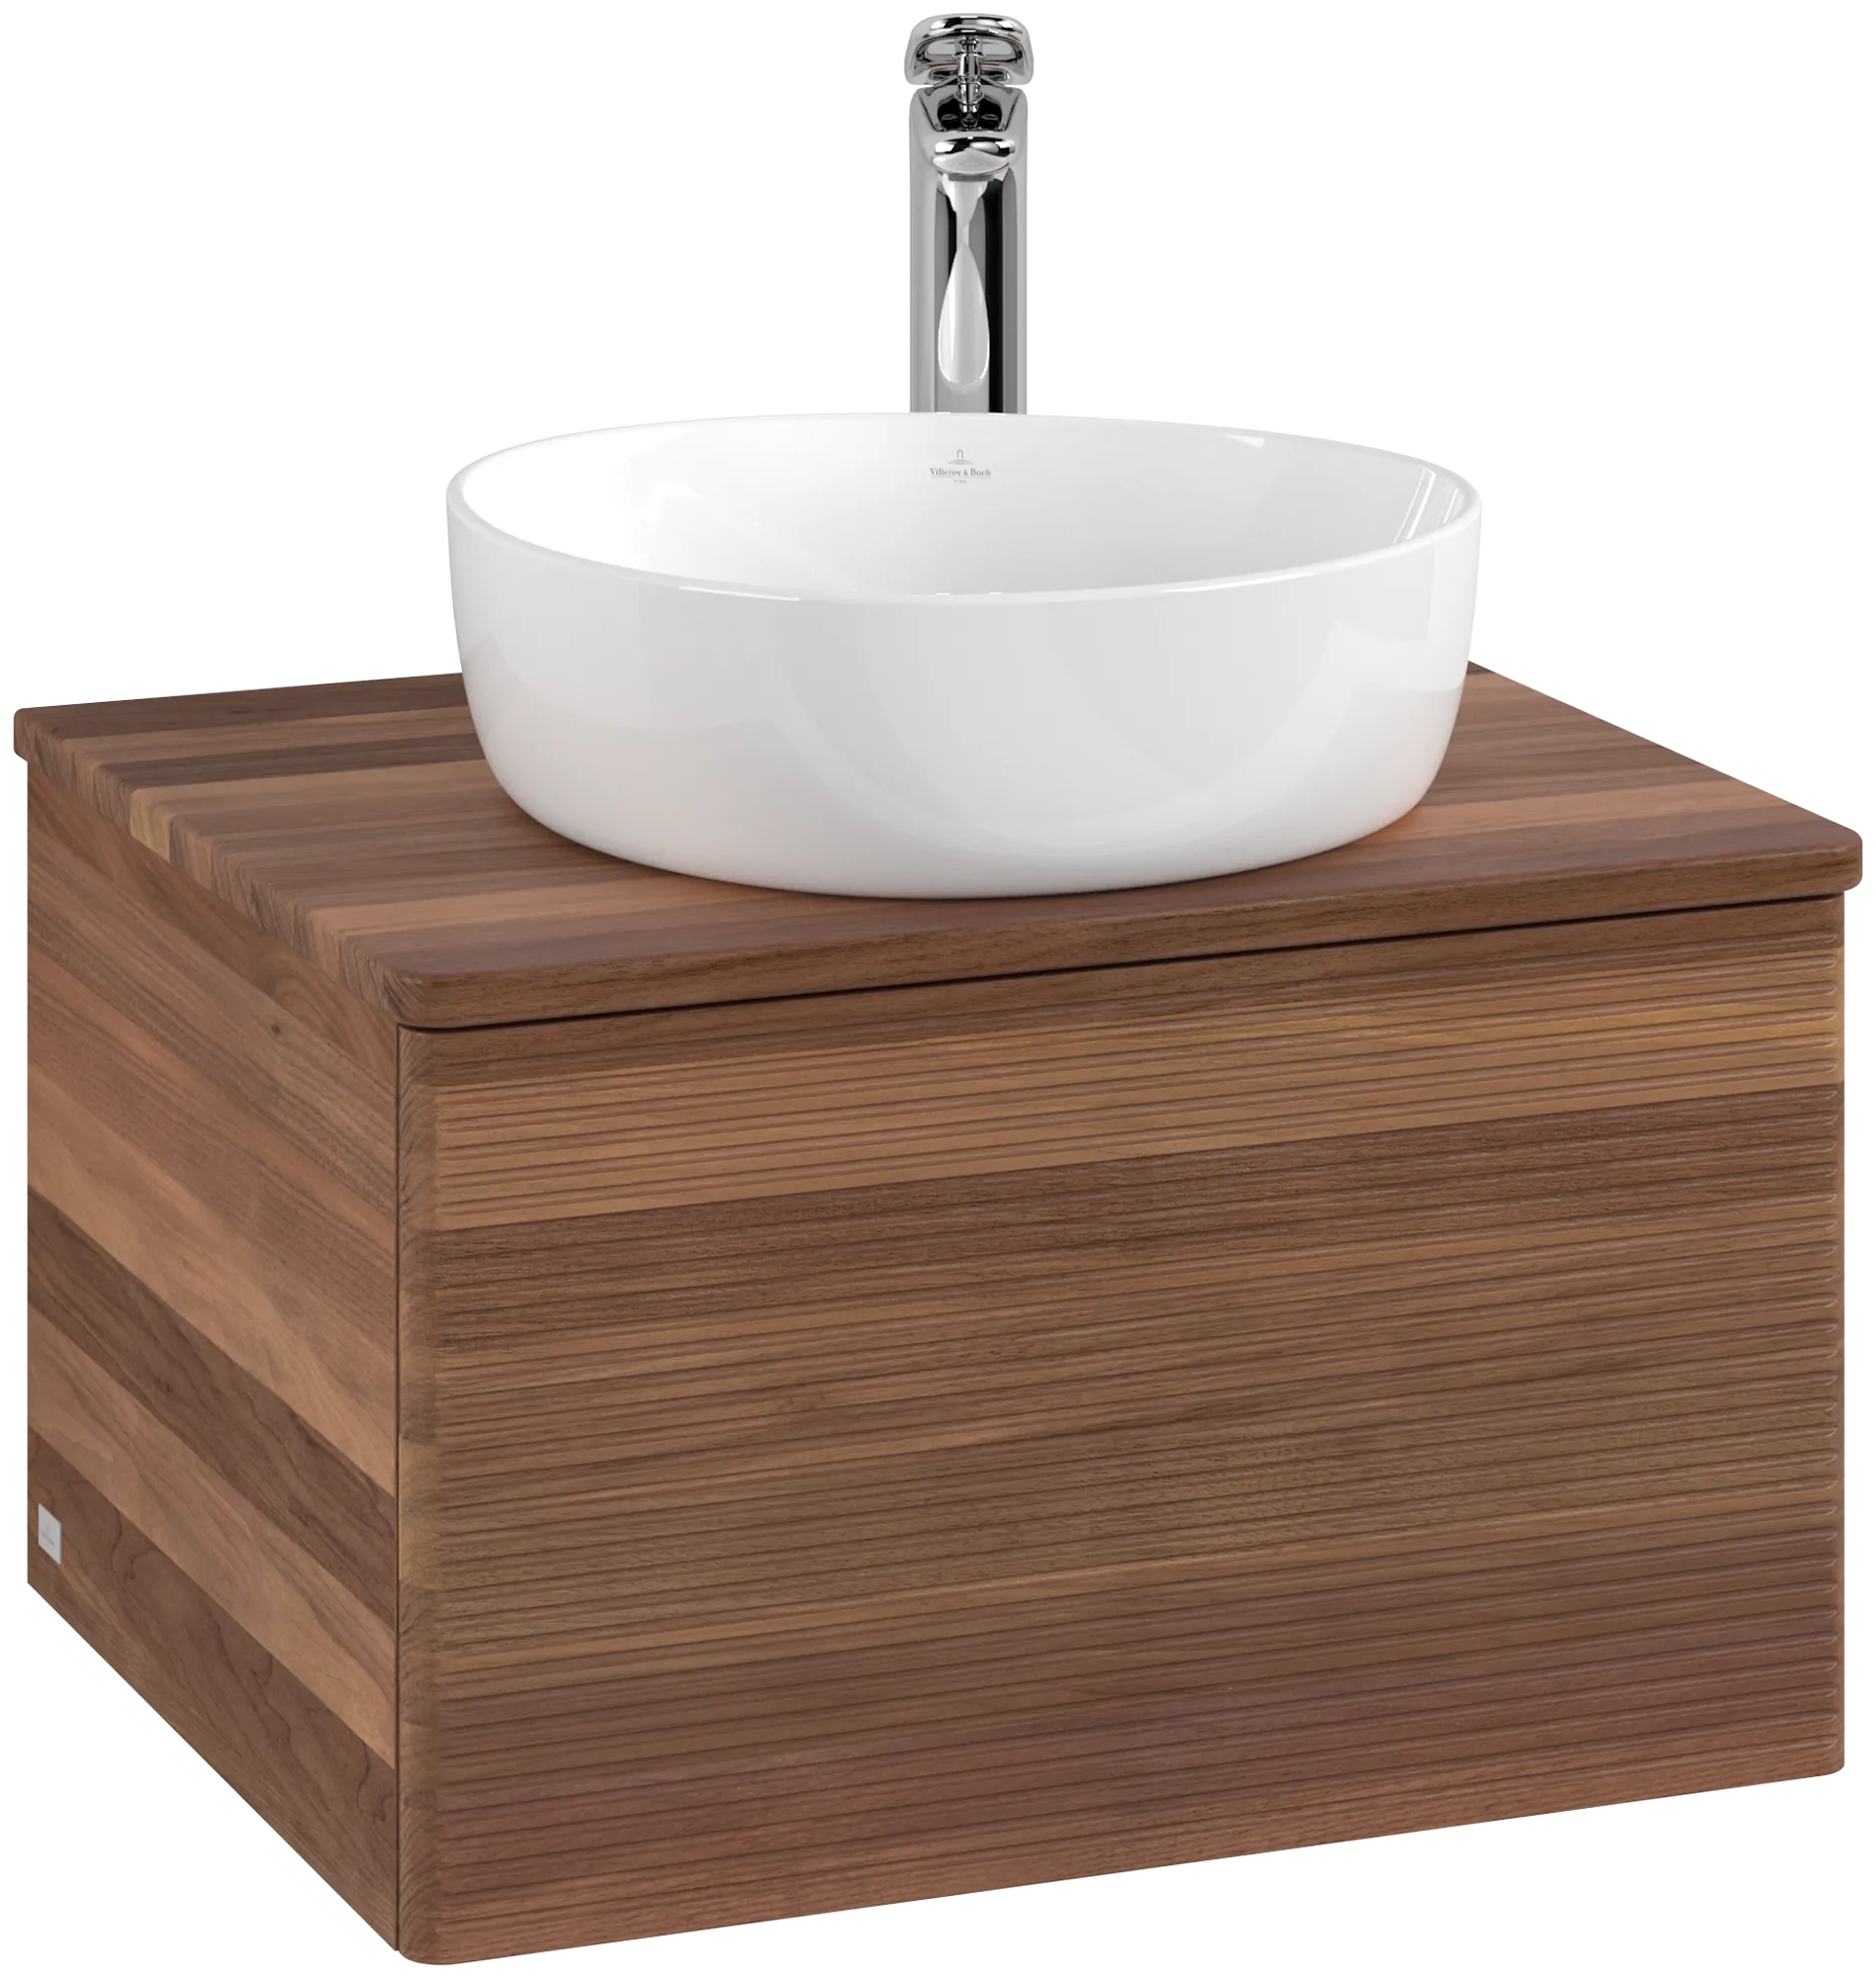 Picture of VILLEROY BOCH Antao Vanity unit, with lighting, 1 pull-out compartment, 600 x 360 x 500 mm, Front with grain texture, Warm Walnut / Warm Walnut #L29152HM